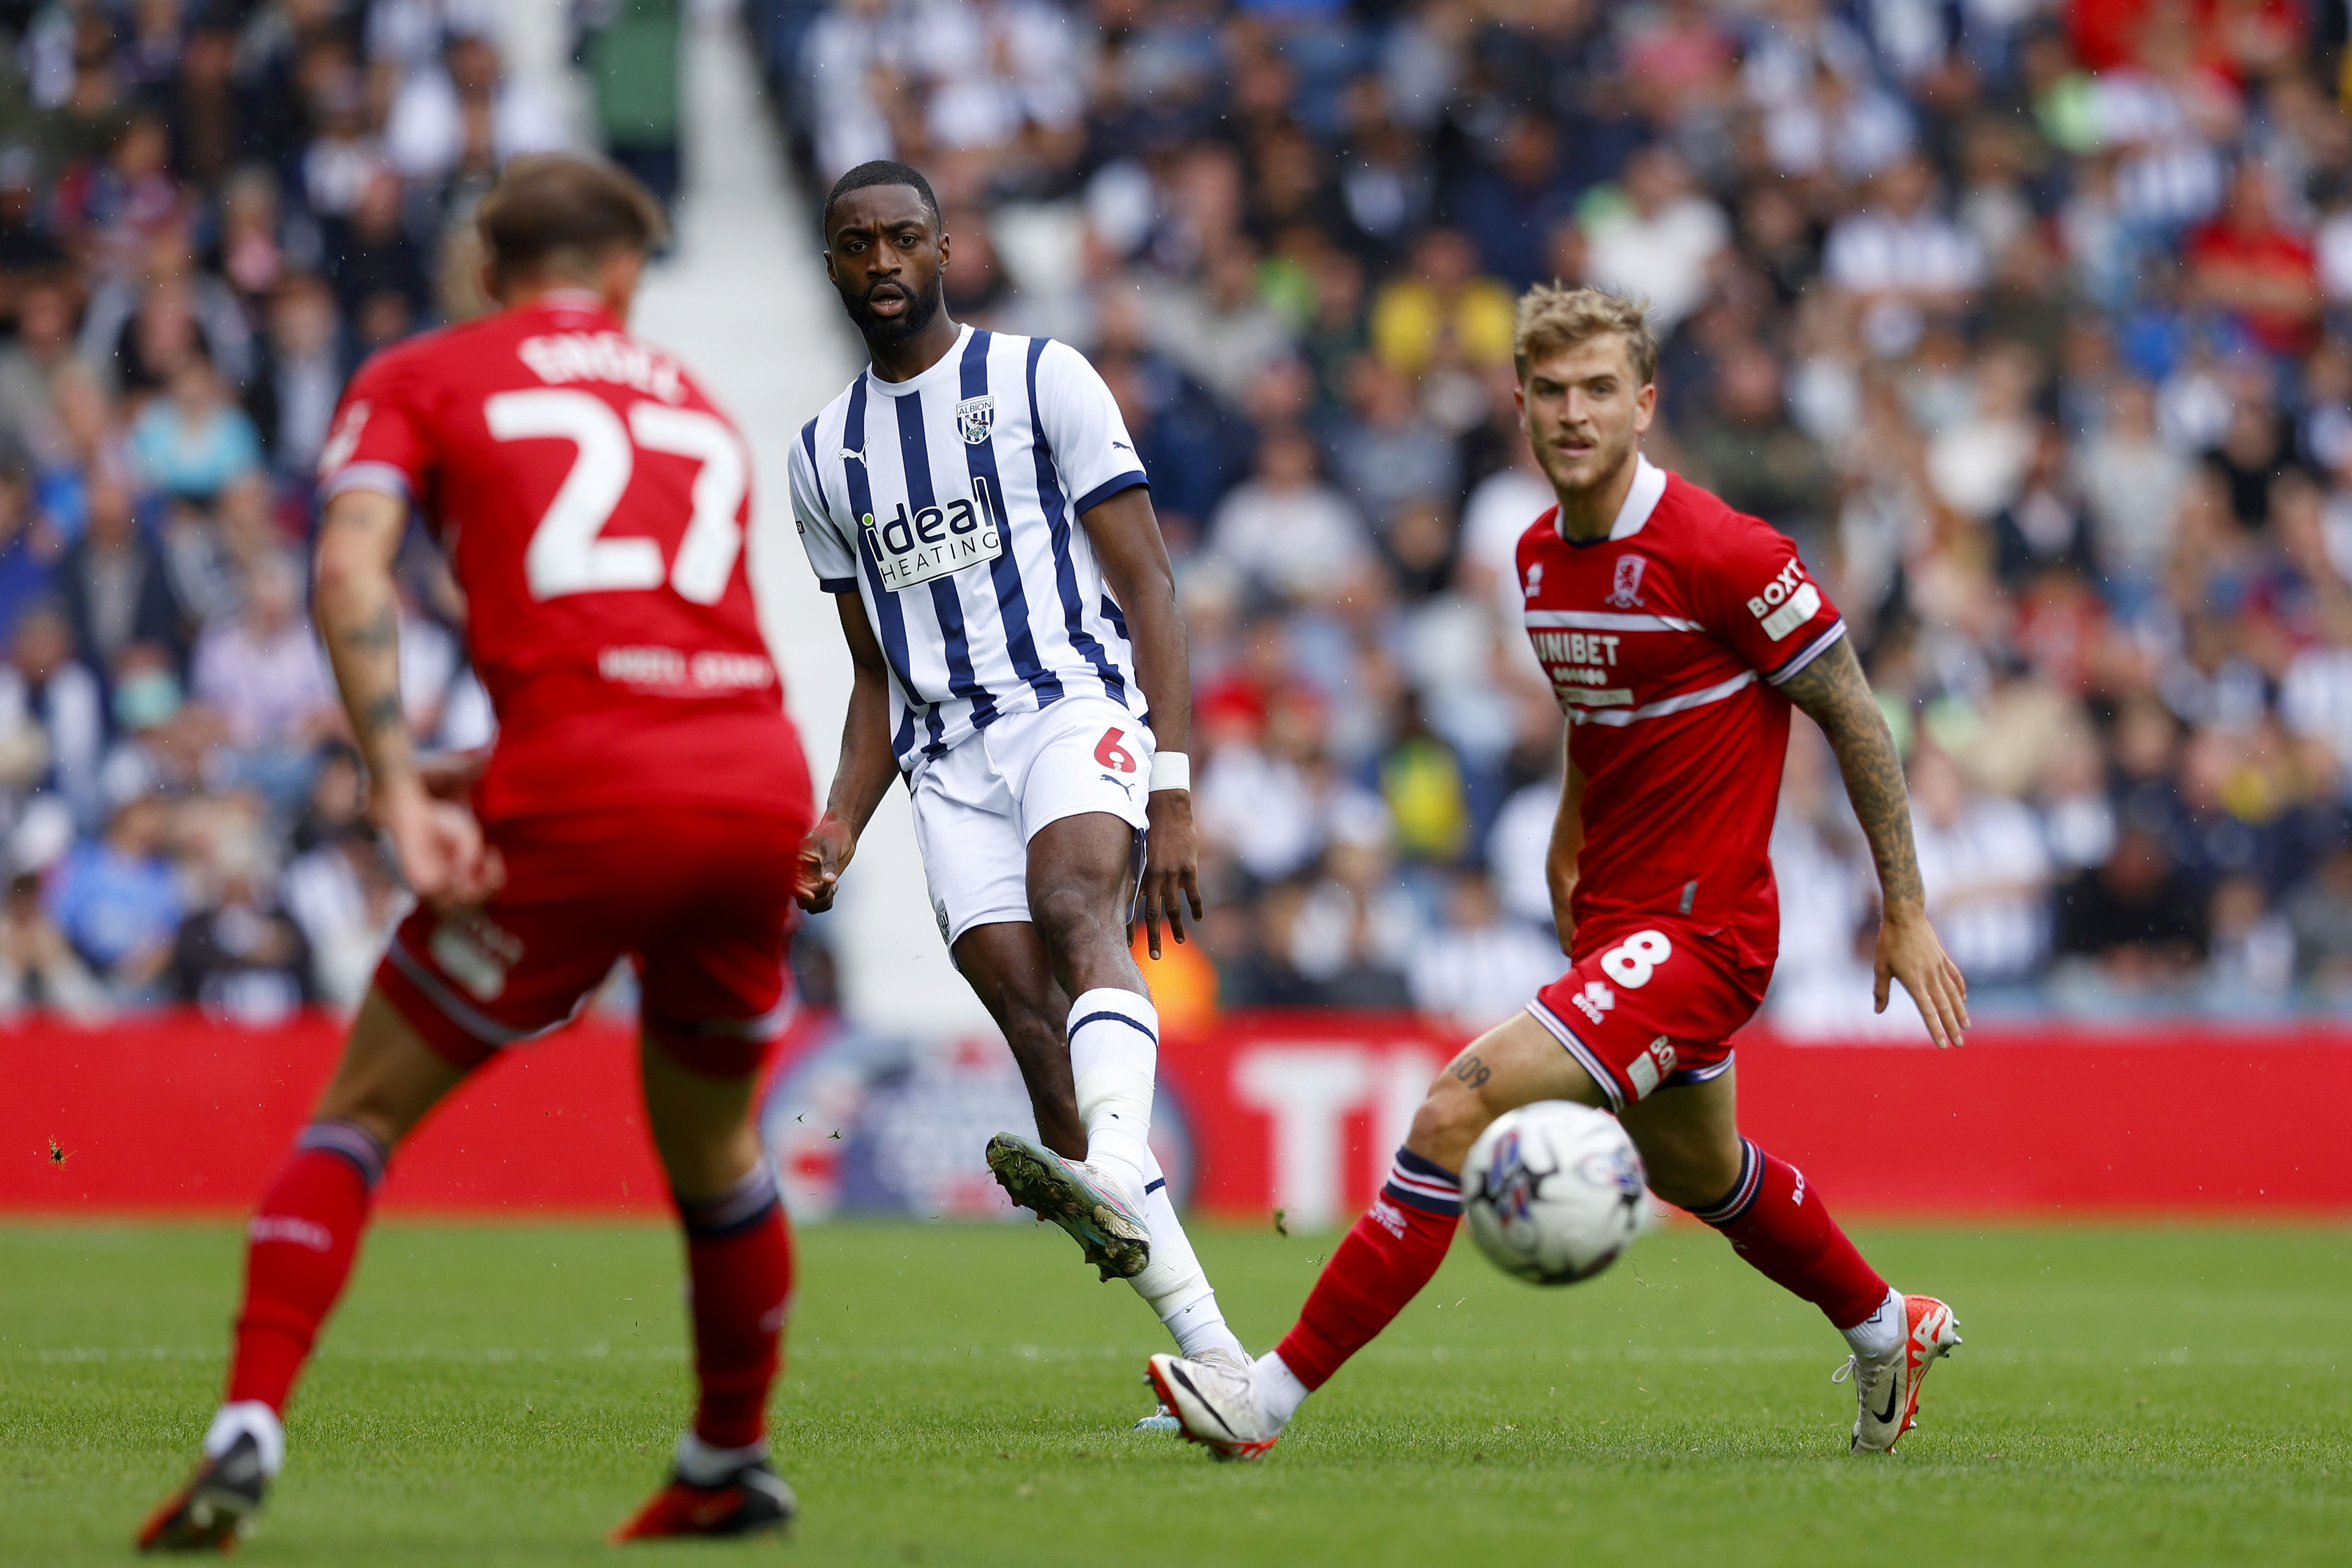 Semi Ajayi in action against Middlesbrough